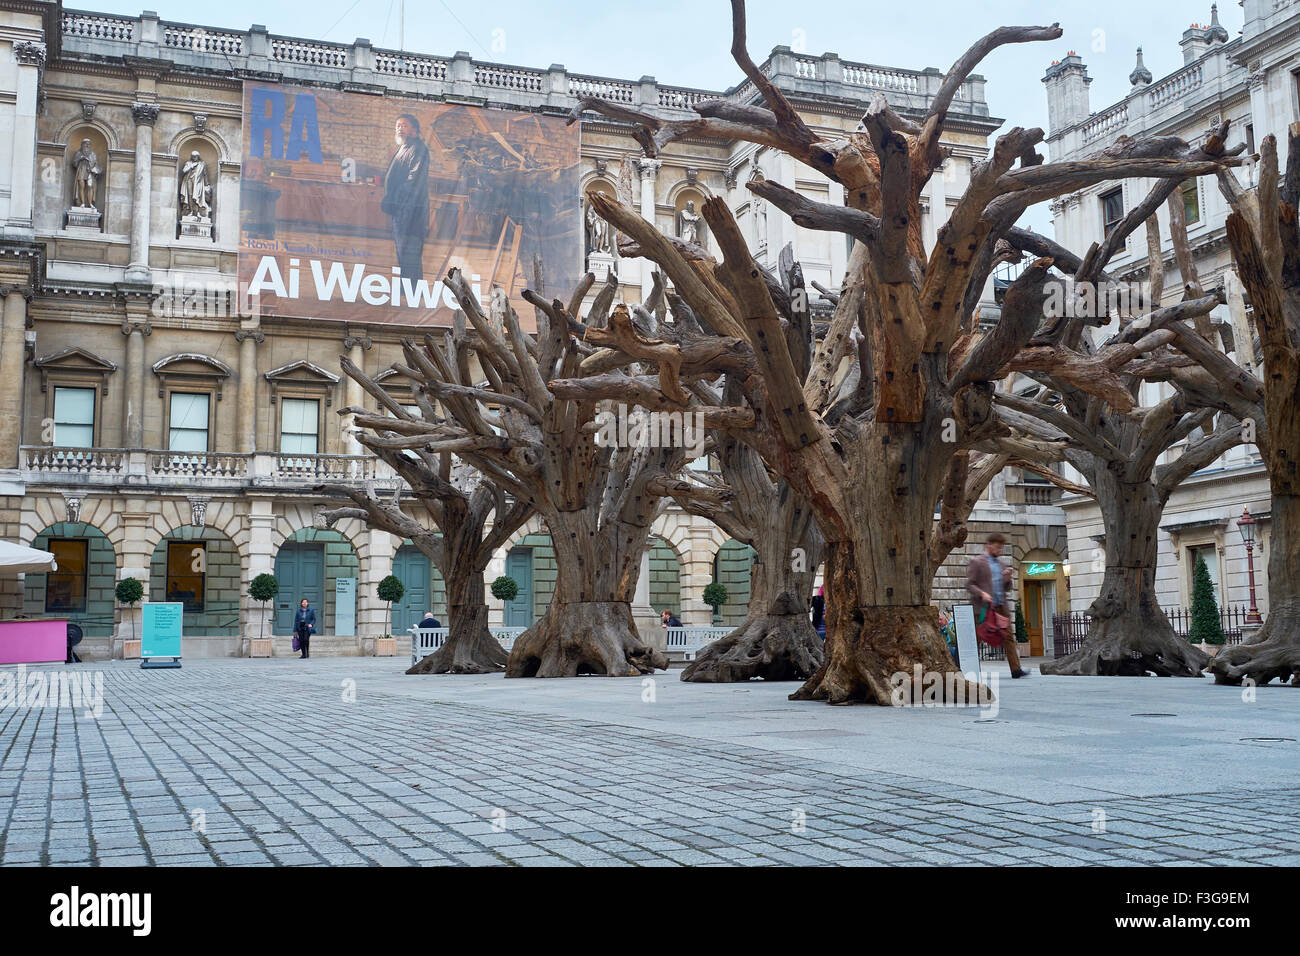 LONDON, UK - SEPTEMBER 23: Ai Wei Wei's installation 'Tree' in the forecourt of the Royal Academy of Arts. September 23, 2015 in Stock Photo